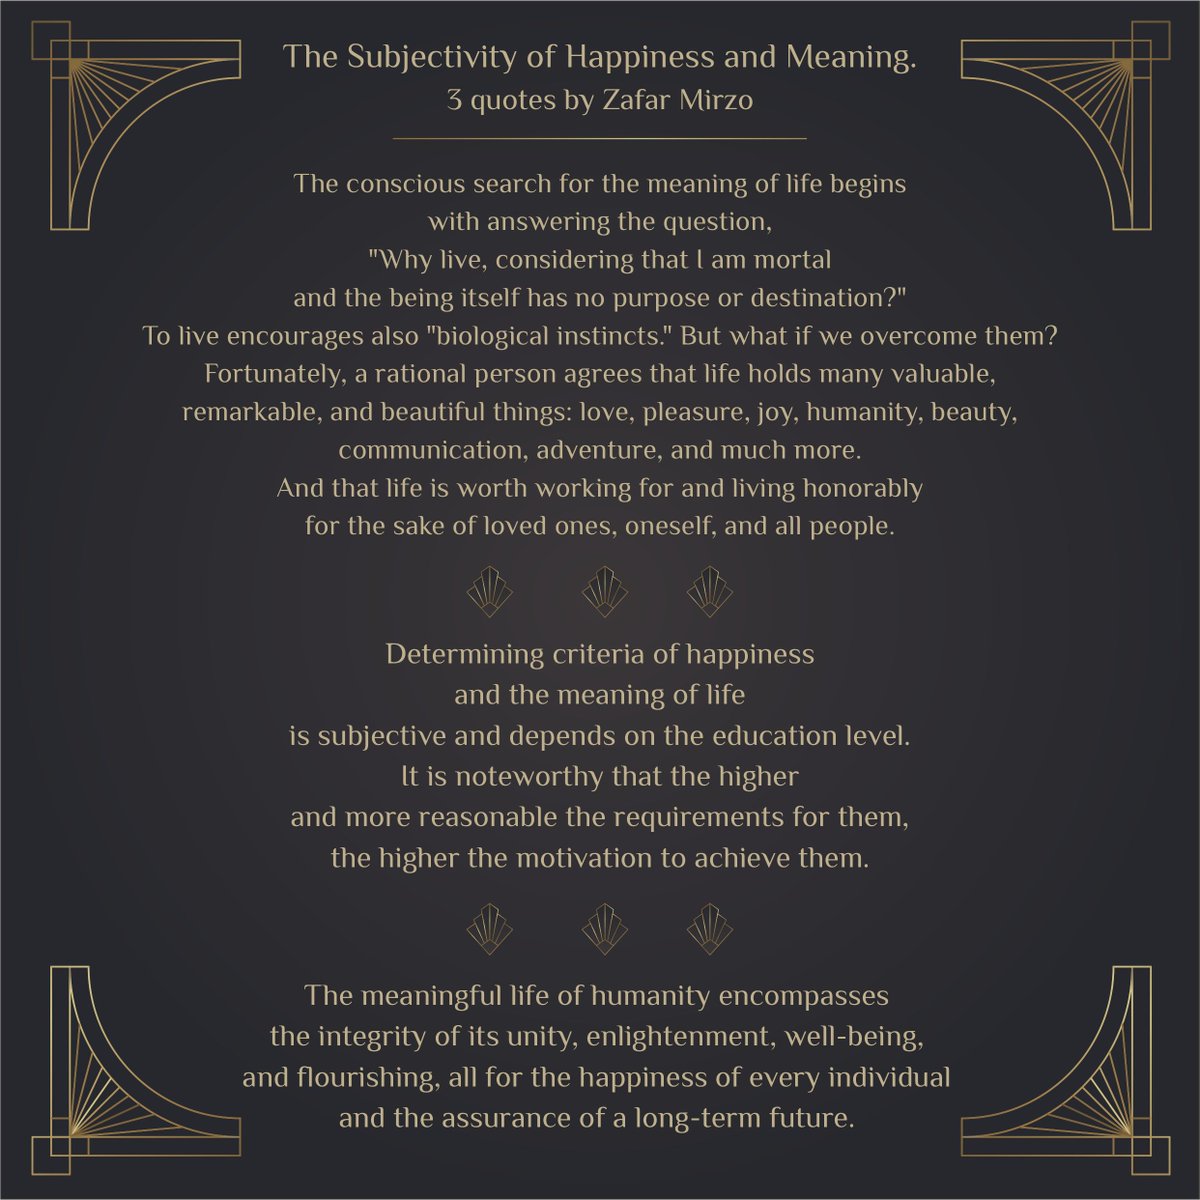 The Subjectivity of Happiness and Meaning. 4 quotes by Zafar Mirzo @zafarmirzo 1. The conscious search for the meaning of life begins with answering the question, 'Why live, considering that I am mortal and the being itself has no purpose or destination?' To live encourages…